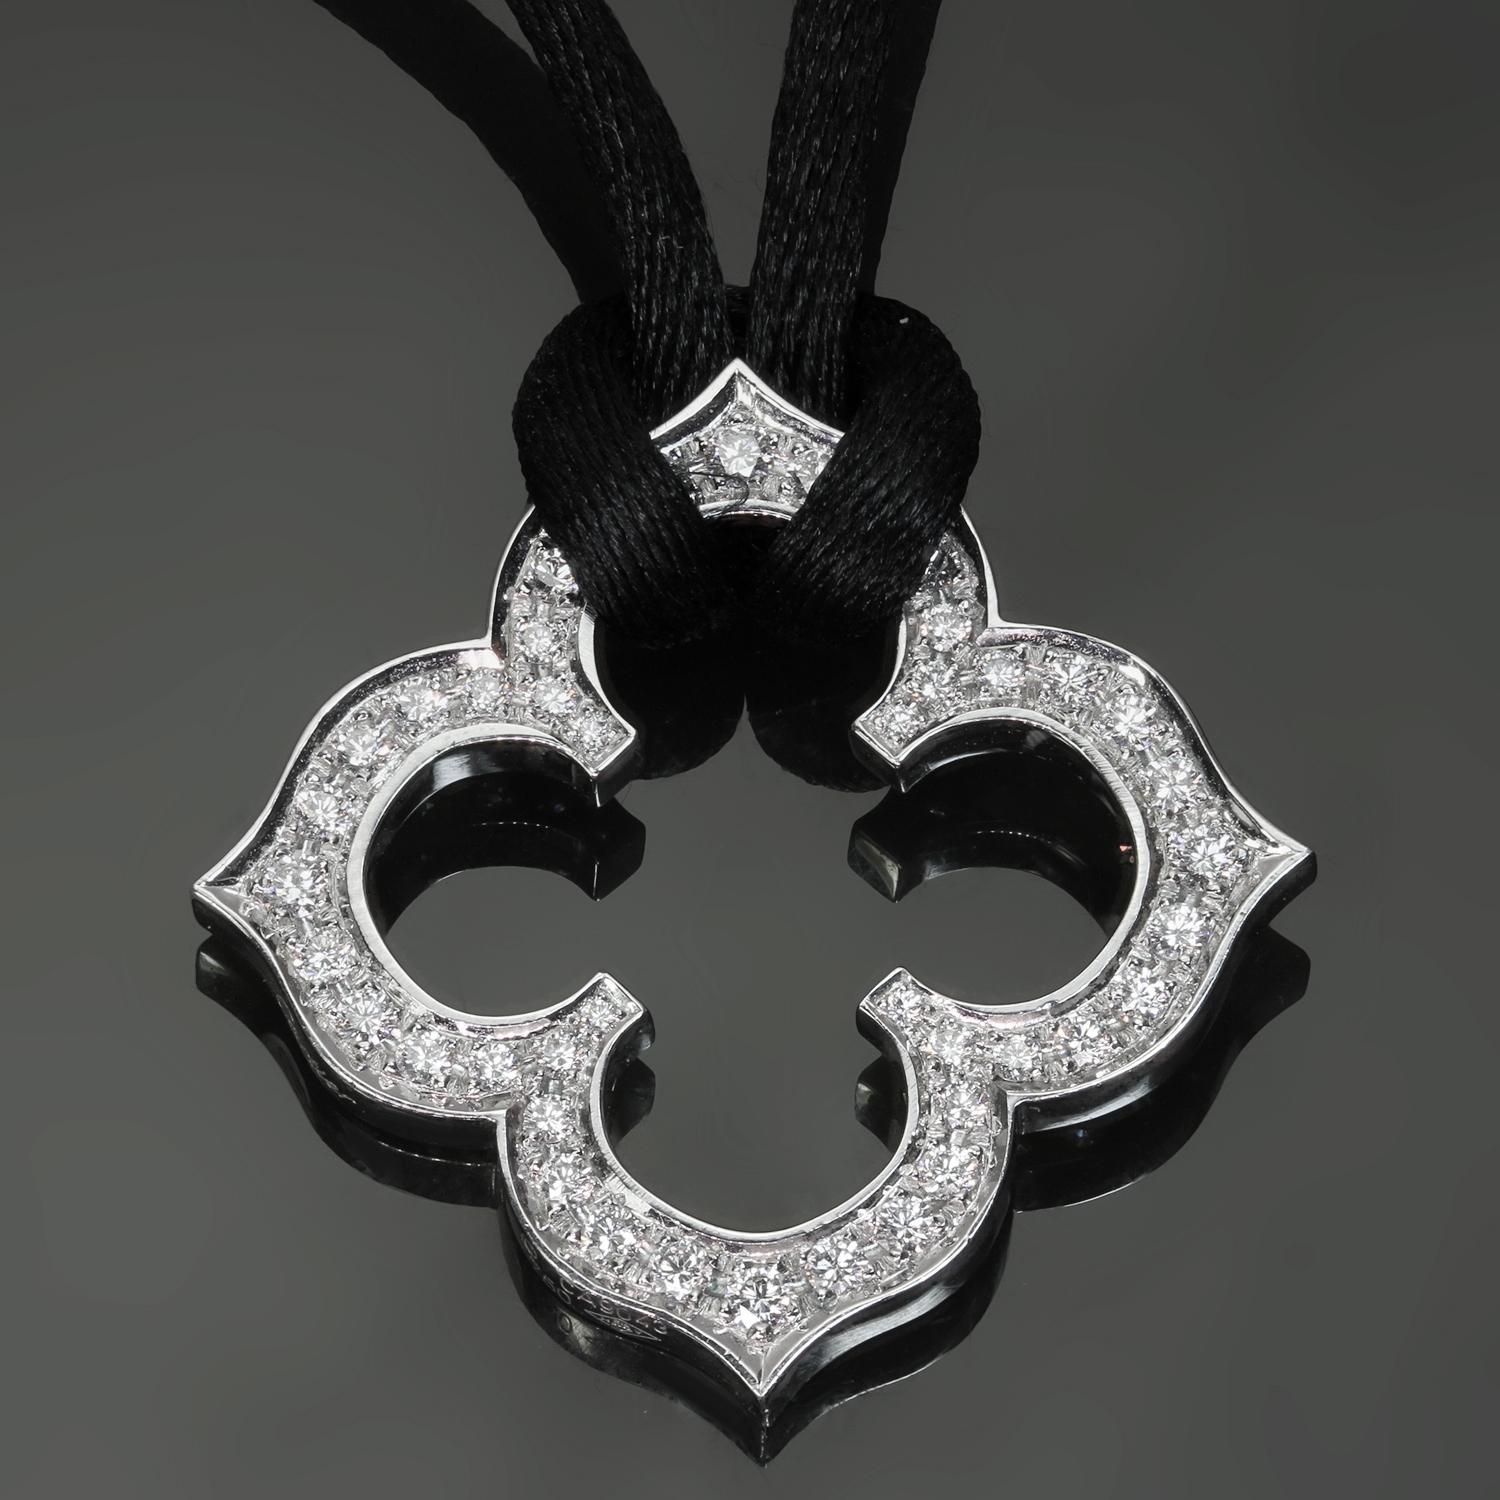 This fantastic Cartier pendant features a classic clover design crafted in 18k white gold and set with brilliant-cut round D-F VVS1-VVS2 diamonds and completed with a black silk cord. Made in France circa 2000s. Measurements: 1.18